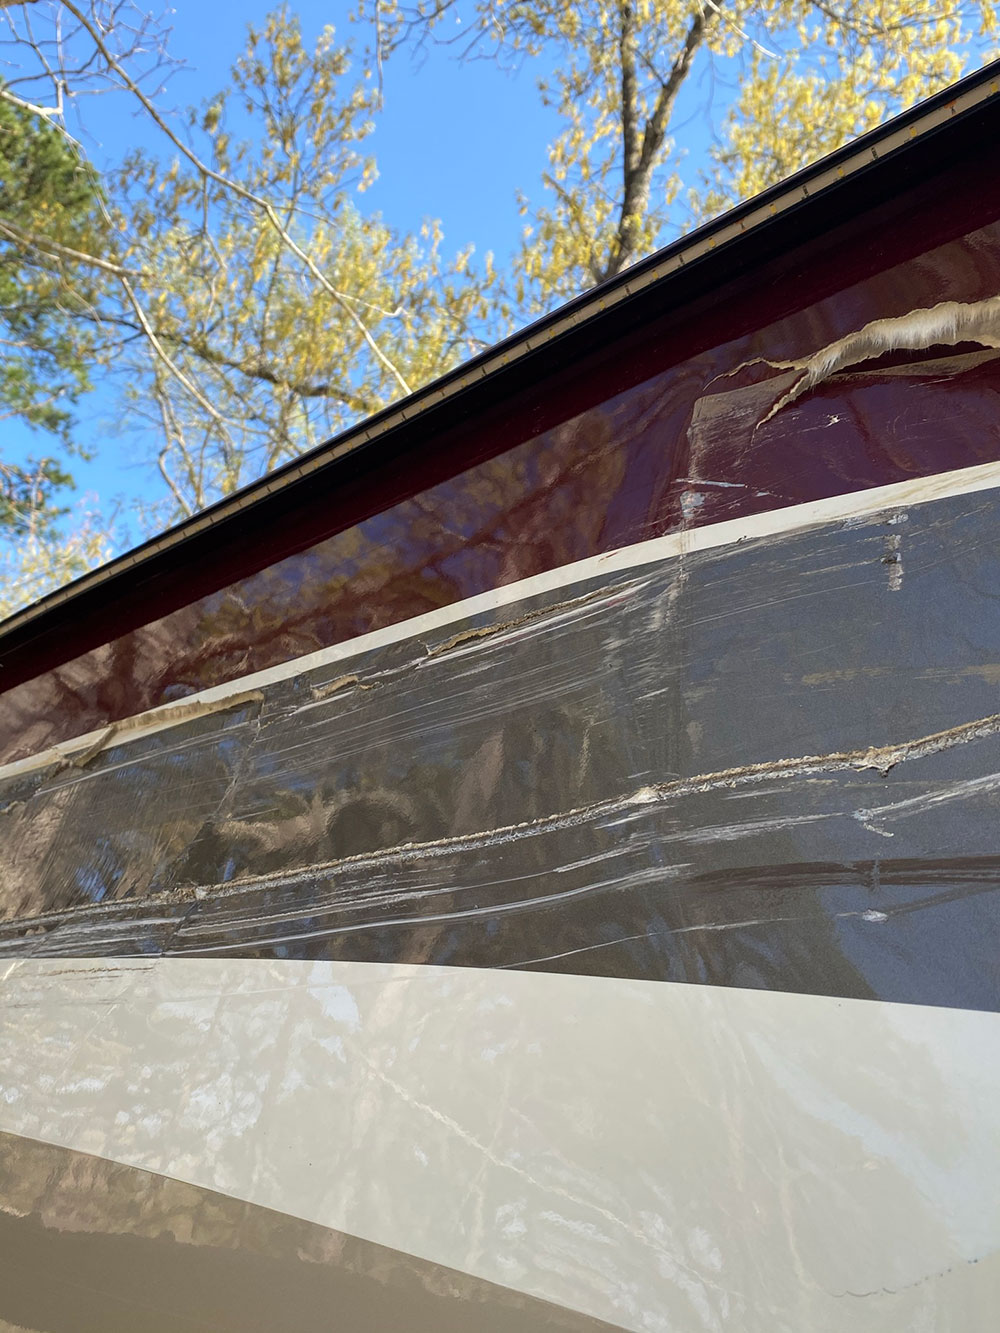 rv with side wall fiberglass and paint damage